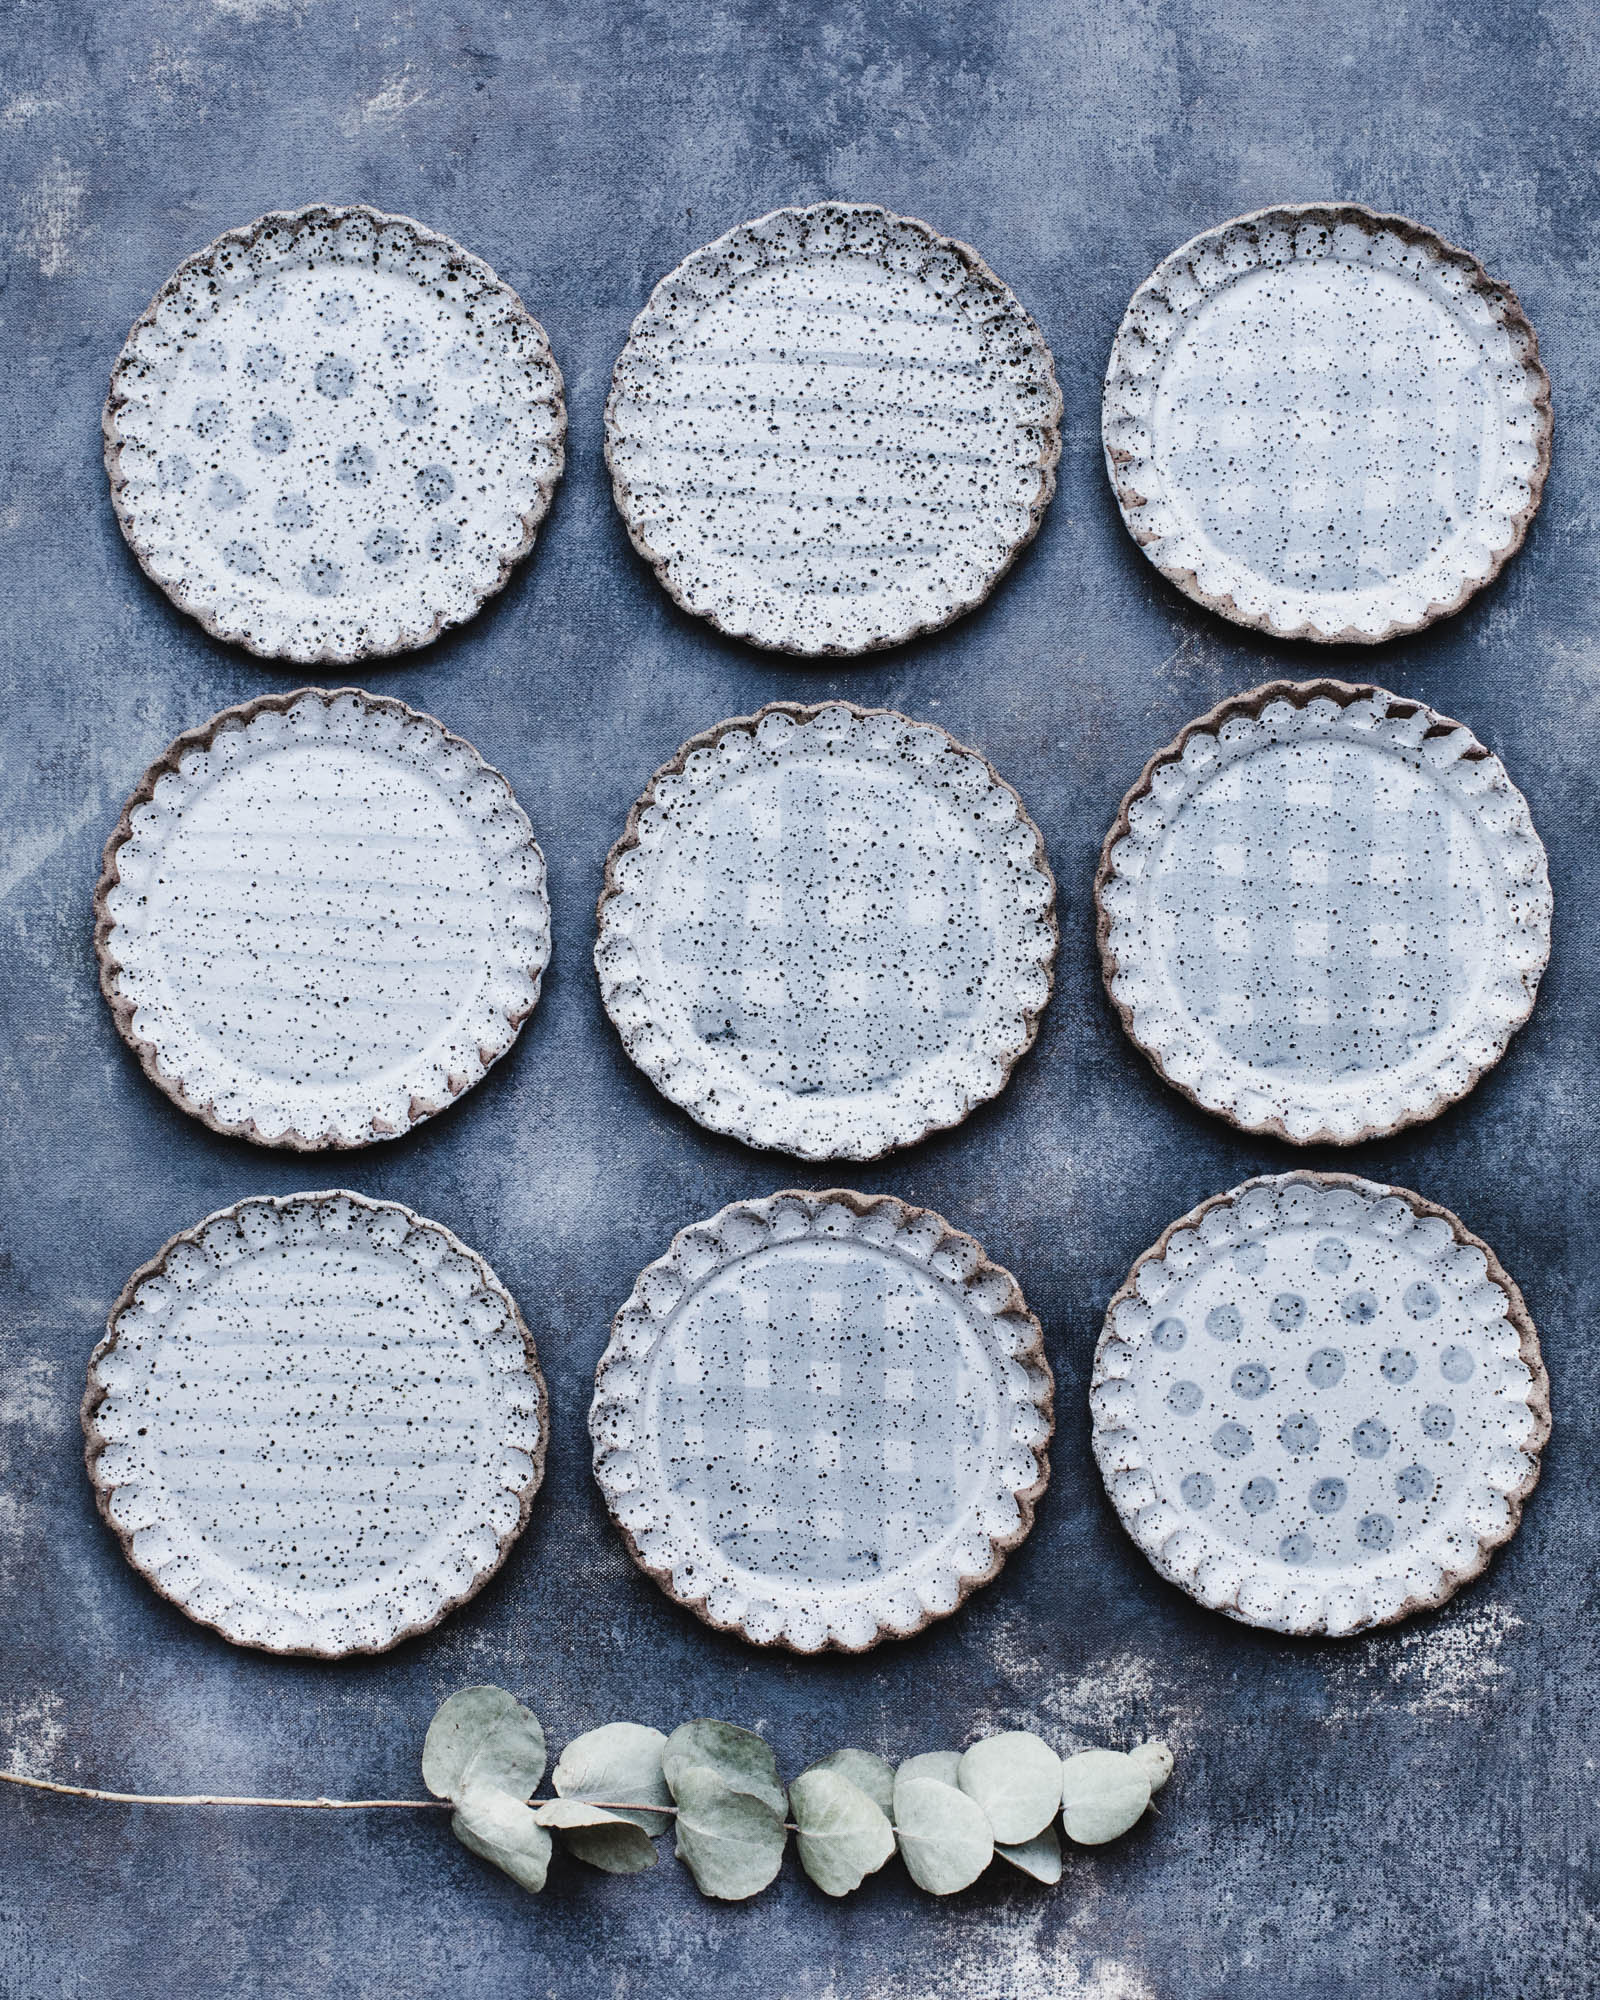 Gritty speckled scalloped rim cake plates with decorative patterns